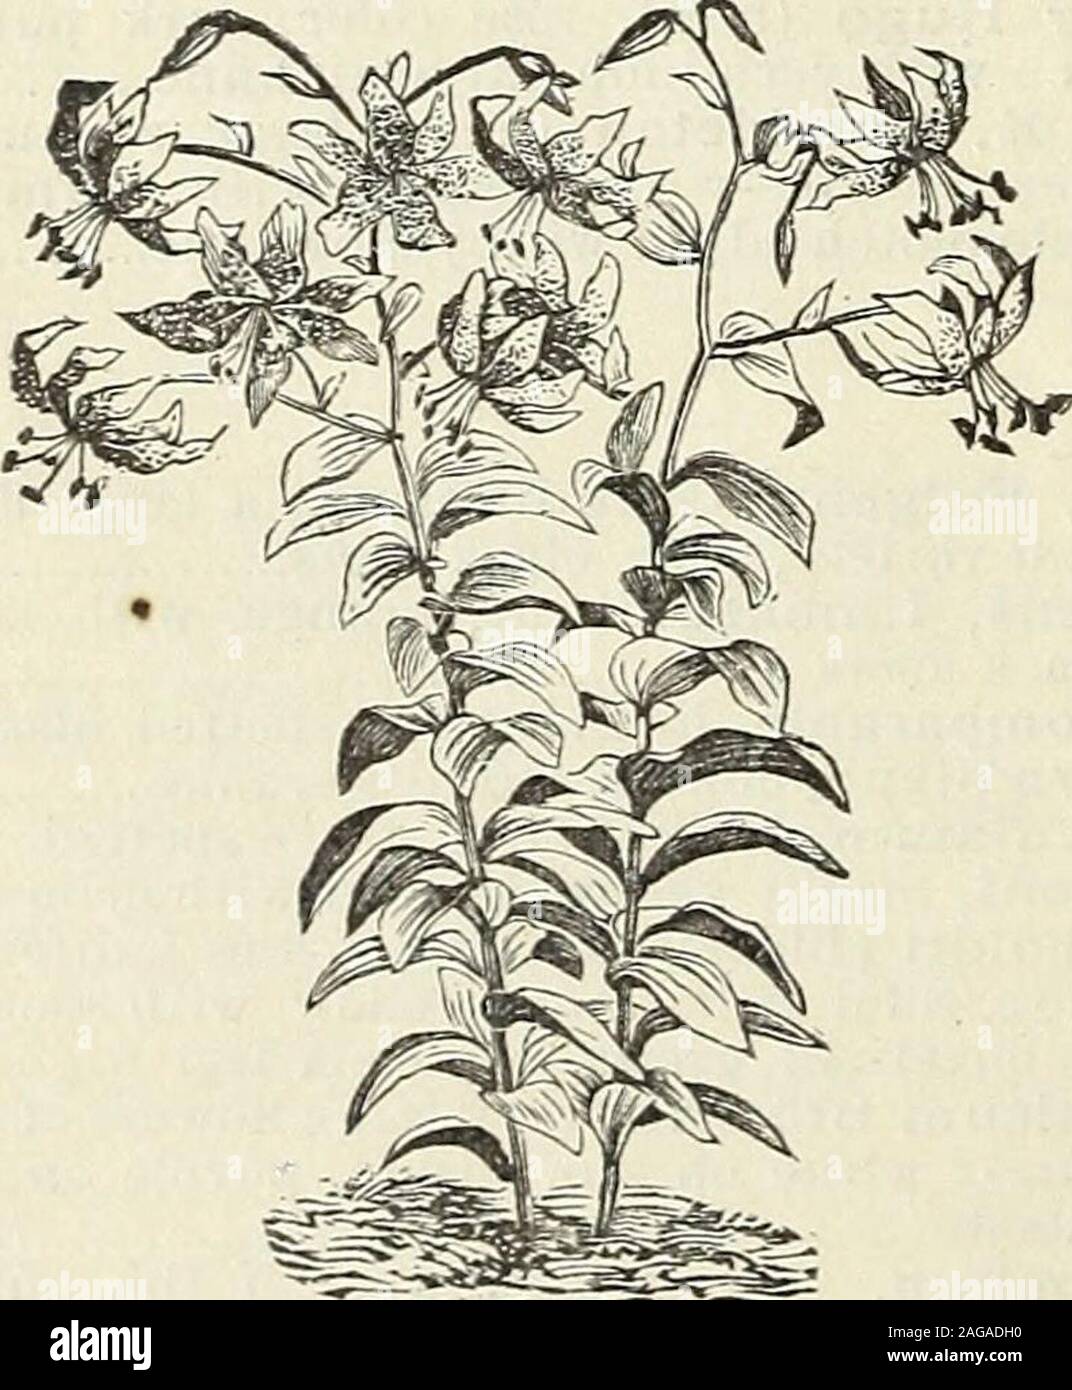 . John Saul's catalogue of plants for the spring of 1889. DOUBLE TIGER LILY. Pomponicum Luteum, flowers yellow 30 Pomponium Verum, this magnificent speciesgrowing about three teet in height, havingnumerous fieryscailet flowers; similar in shadeto Clialcedonicum, but the bulbsare much easier to grow 60 Purpuratum, deep rich color 50 Rubrum Verum, verv tine deep color, beau- tiftil 75 Schrymakersii, very rich, deep crimson 30. LILIUM SPECIOSUM. Szovitsianum (Colchicum or Monadelphum),stem three to four feet, flowers bright citron-yellow with black points. 2}4 to d]4 inches loDfj, fragrant and ea Stock Photo